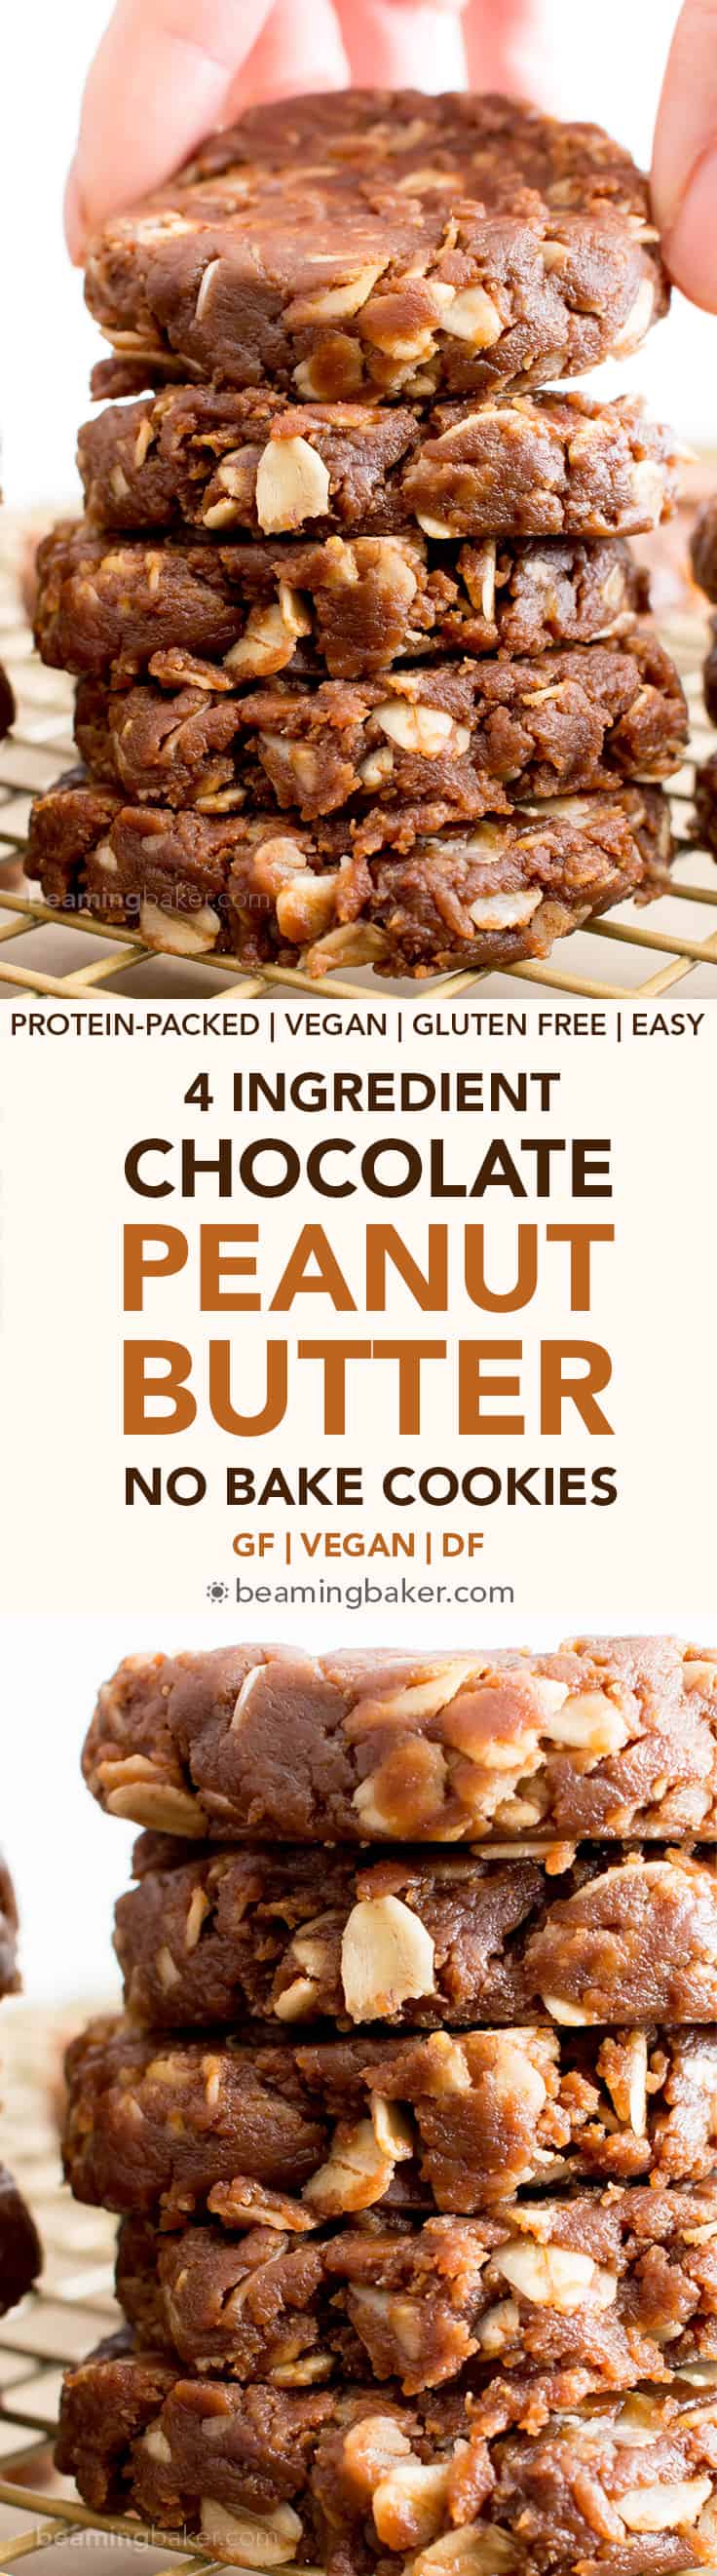 4 Ingredient No Bake Chocolate Peanut Butter #Healthy #ProteinPacked Oatmeal Cookies (V, GF, DF): an easy recipe for perfectly chewy no bake peanut butter cookies bursting with chocolate flavor. #Vegan #GlutenFree #DairyFree #Chocolate #Cookies | Recipe on BeamingBaker.com